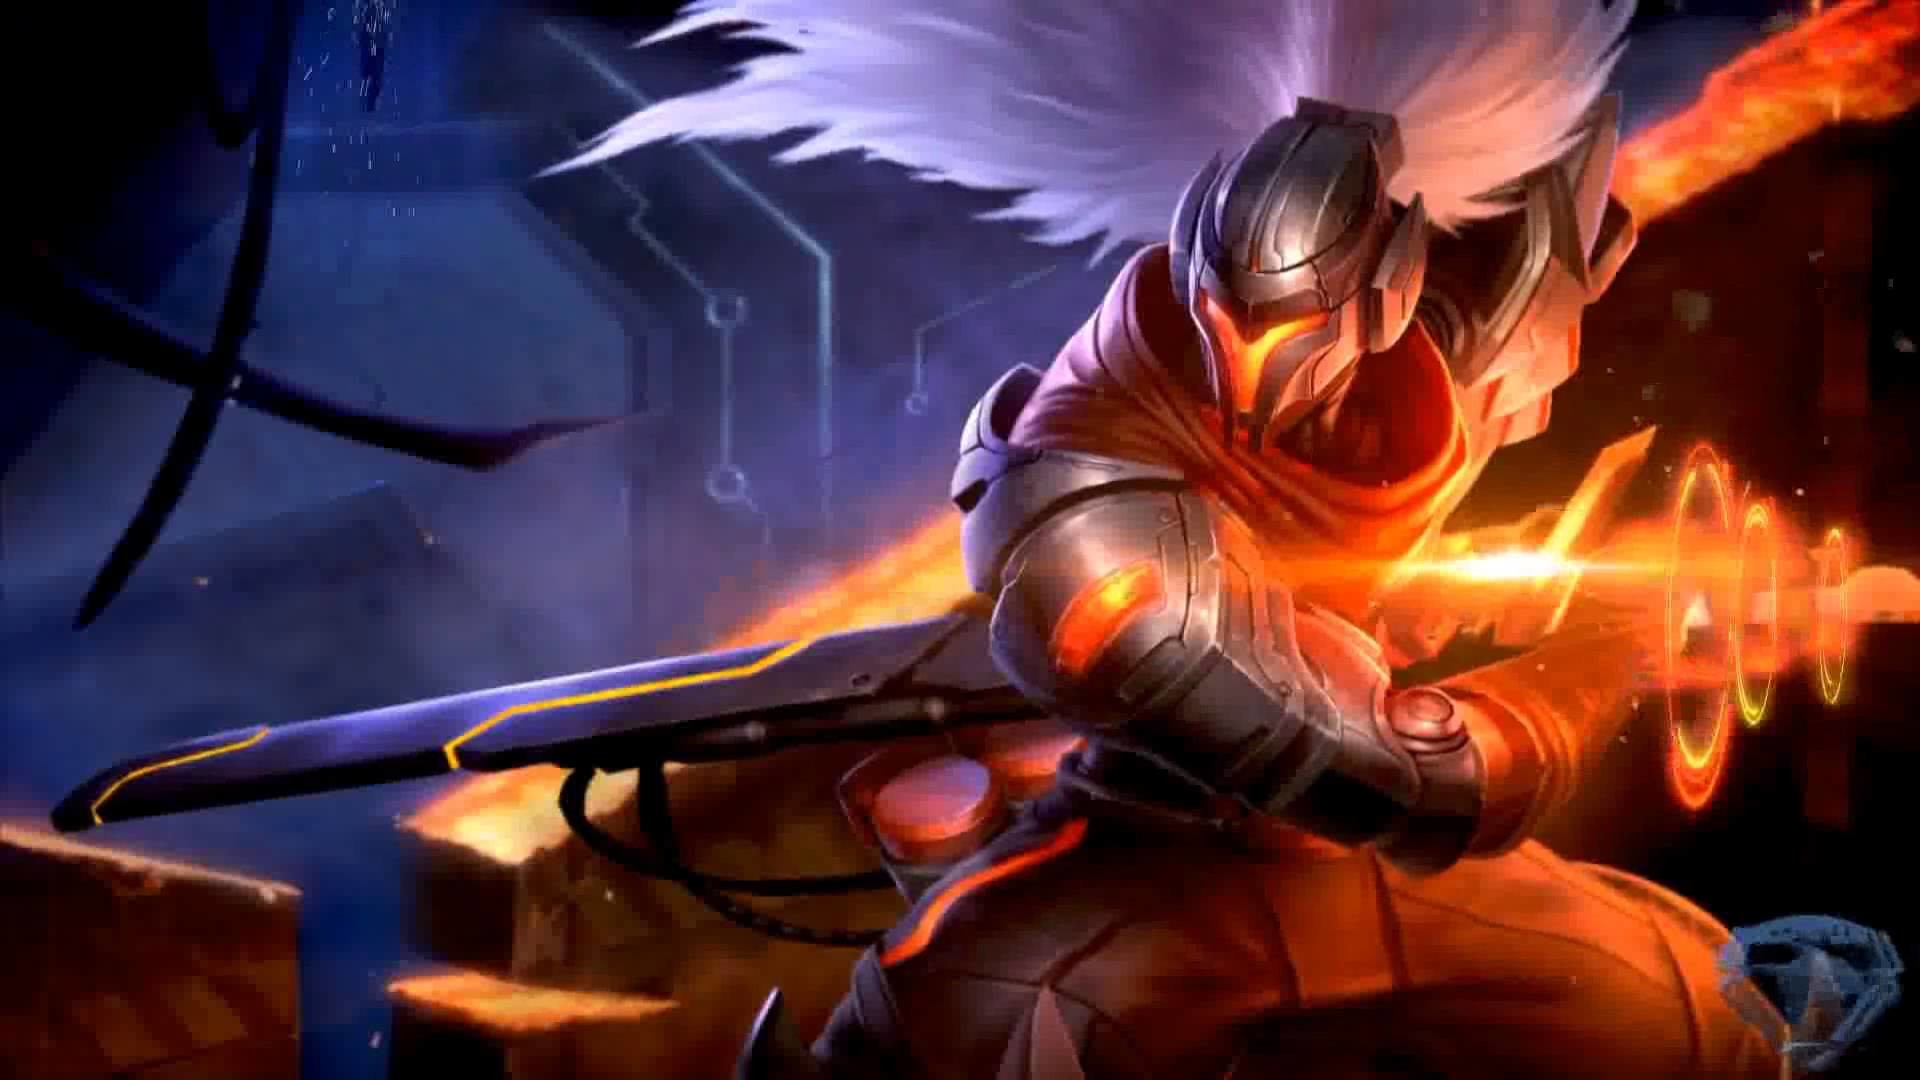 1920x1080 Project Yasuo (animated by DeepSpeeD187) Live Wallpaper (Dreamscene/Android  LWP) - YouTube